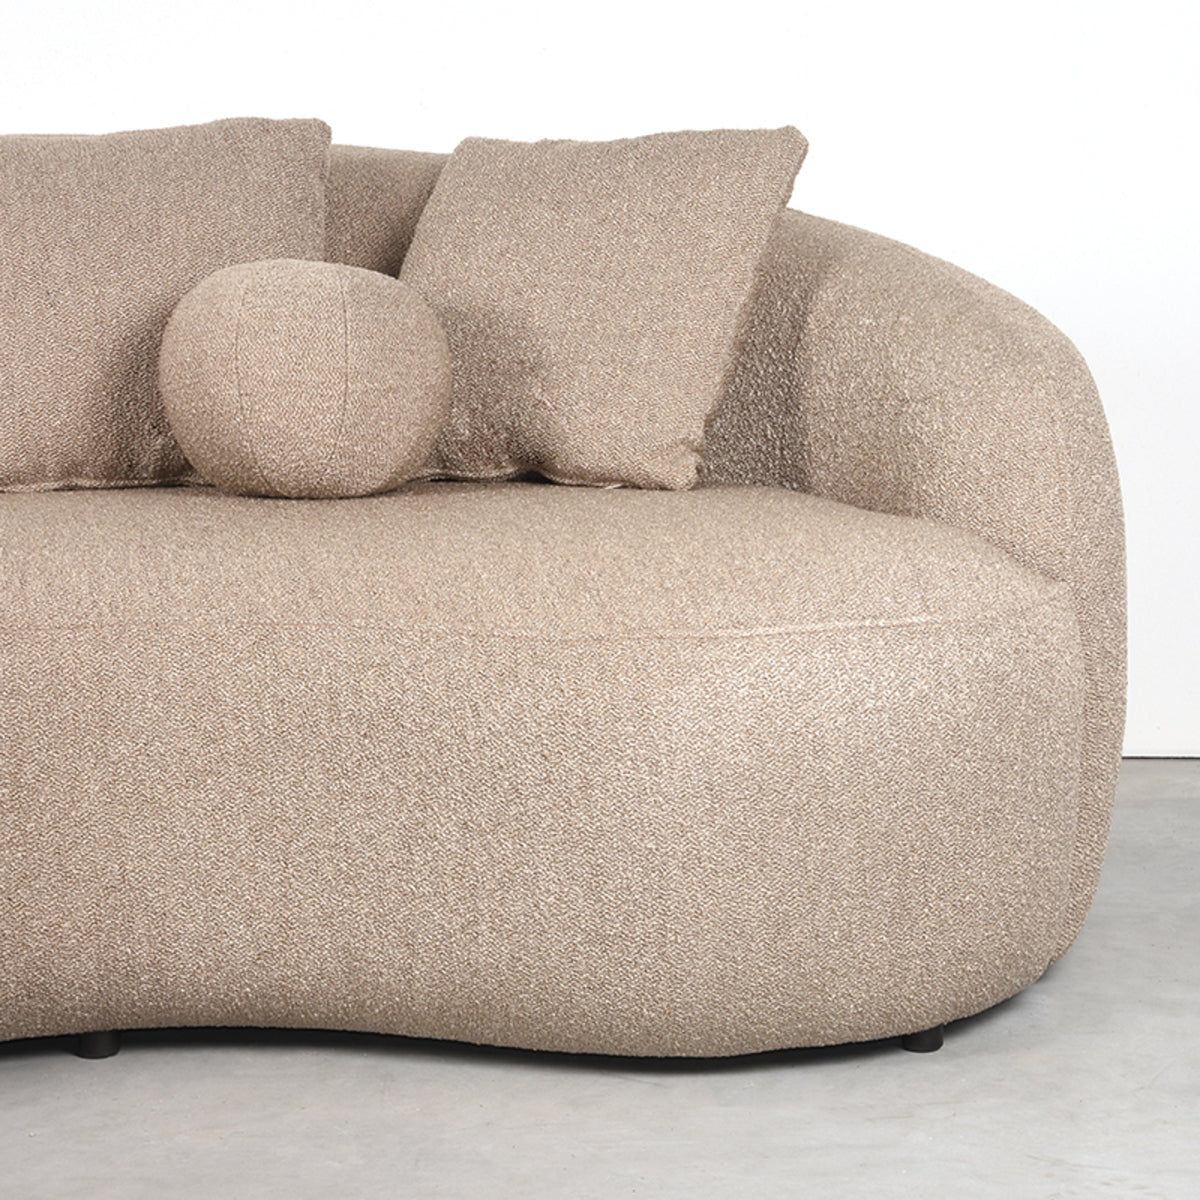 LABEL51 Sofa Nesso - Clay - Boucle - 2-Seater